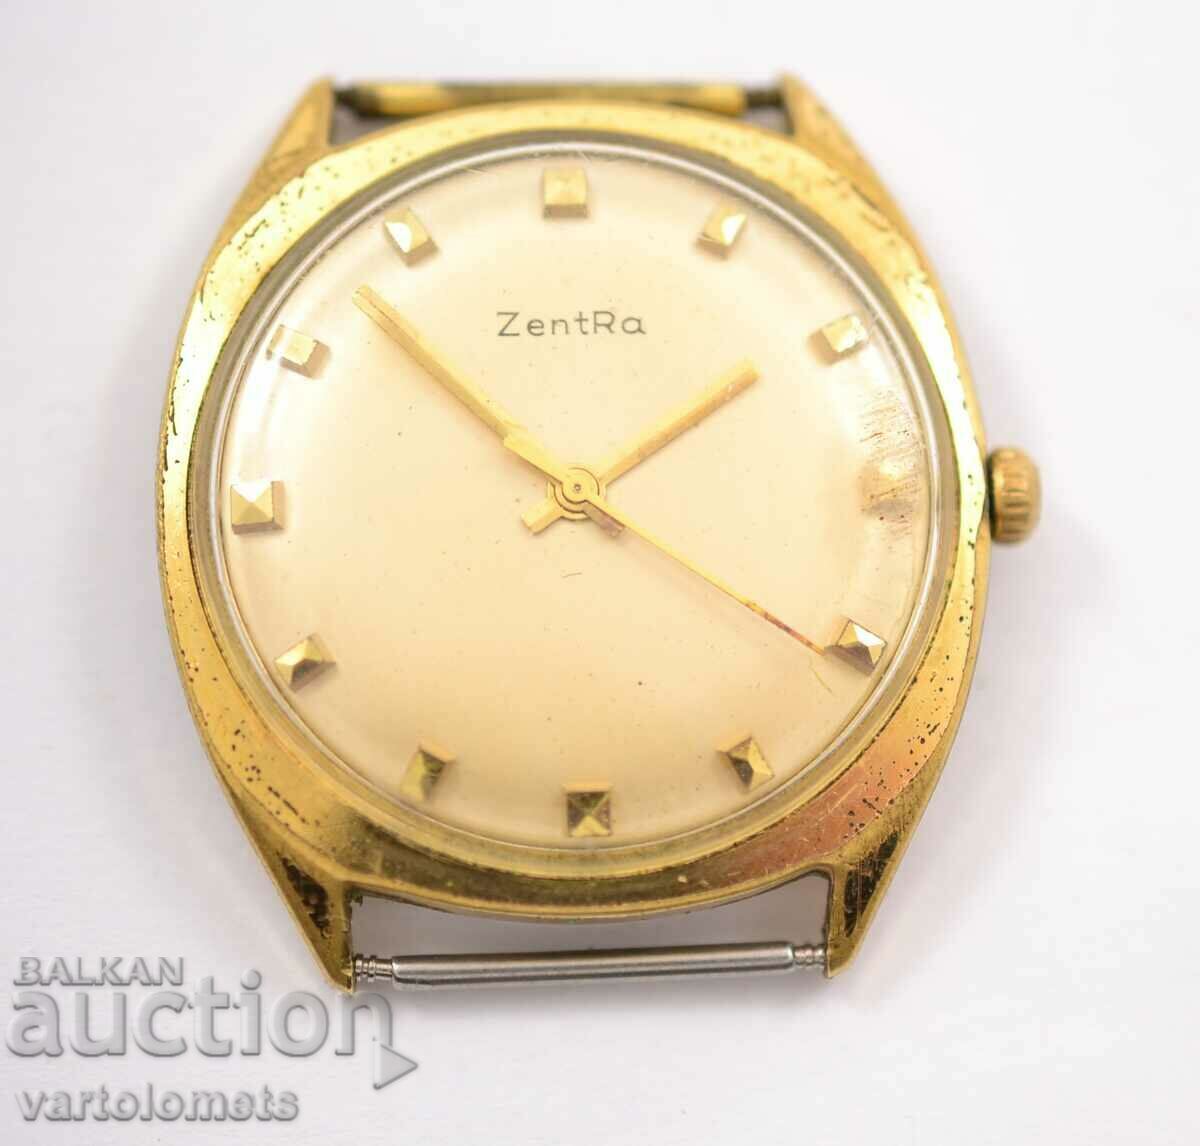 ZentRa made in Germany with gold plating - works